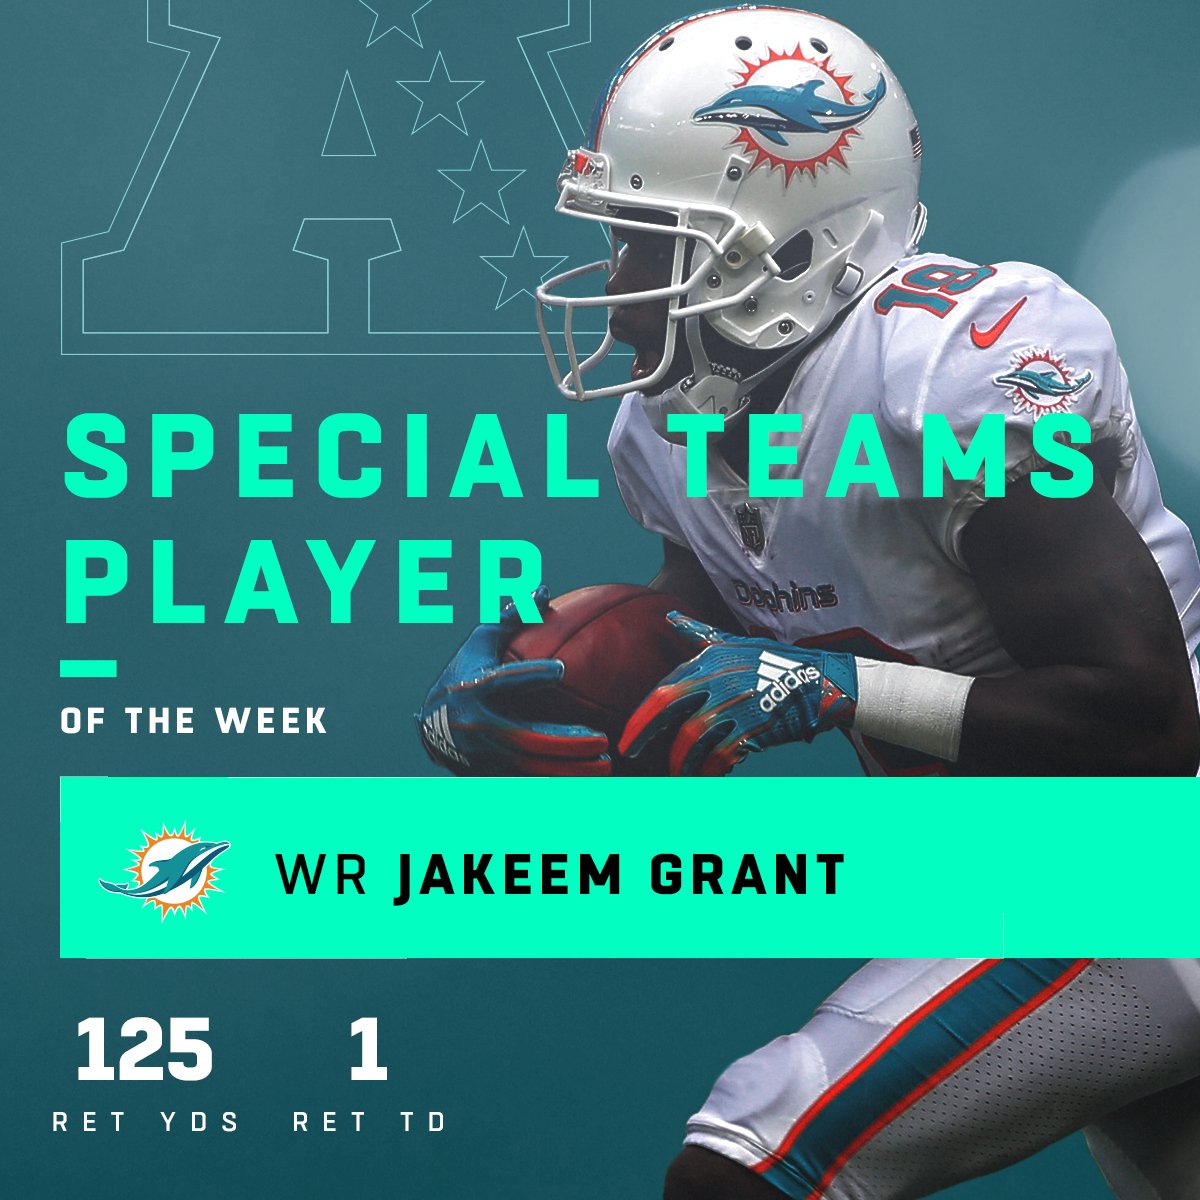 Nfl On Twitter Players Of The Week For Week 1 Special